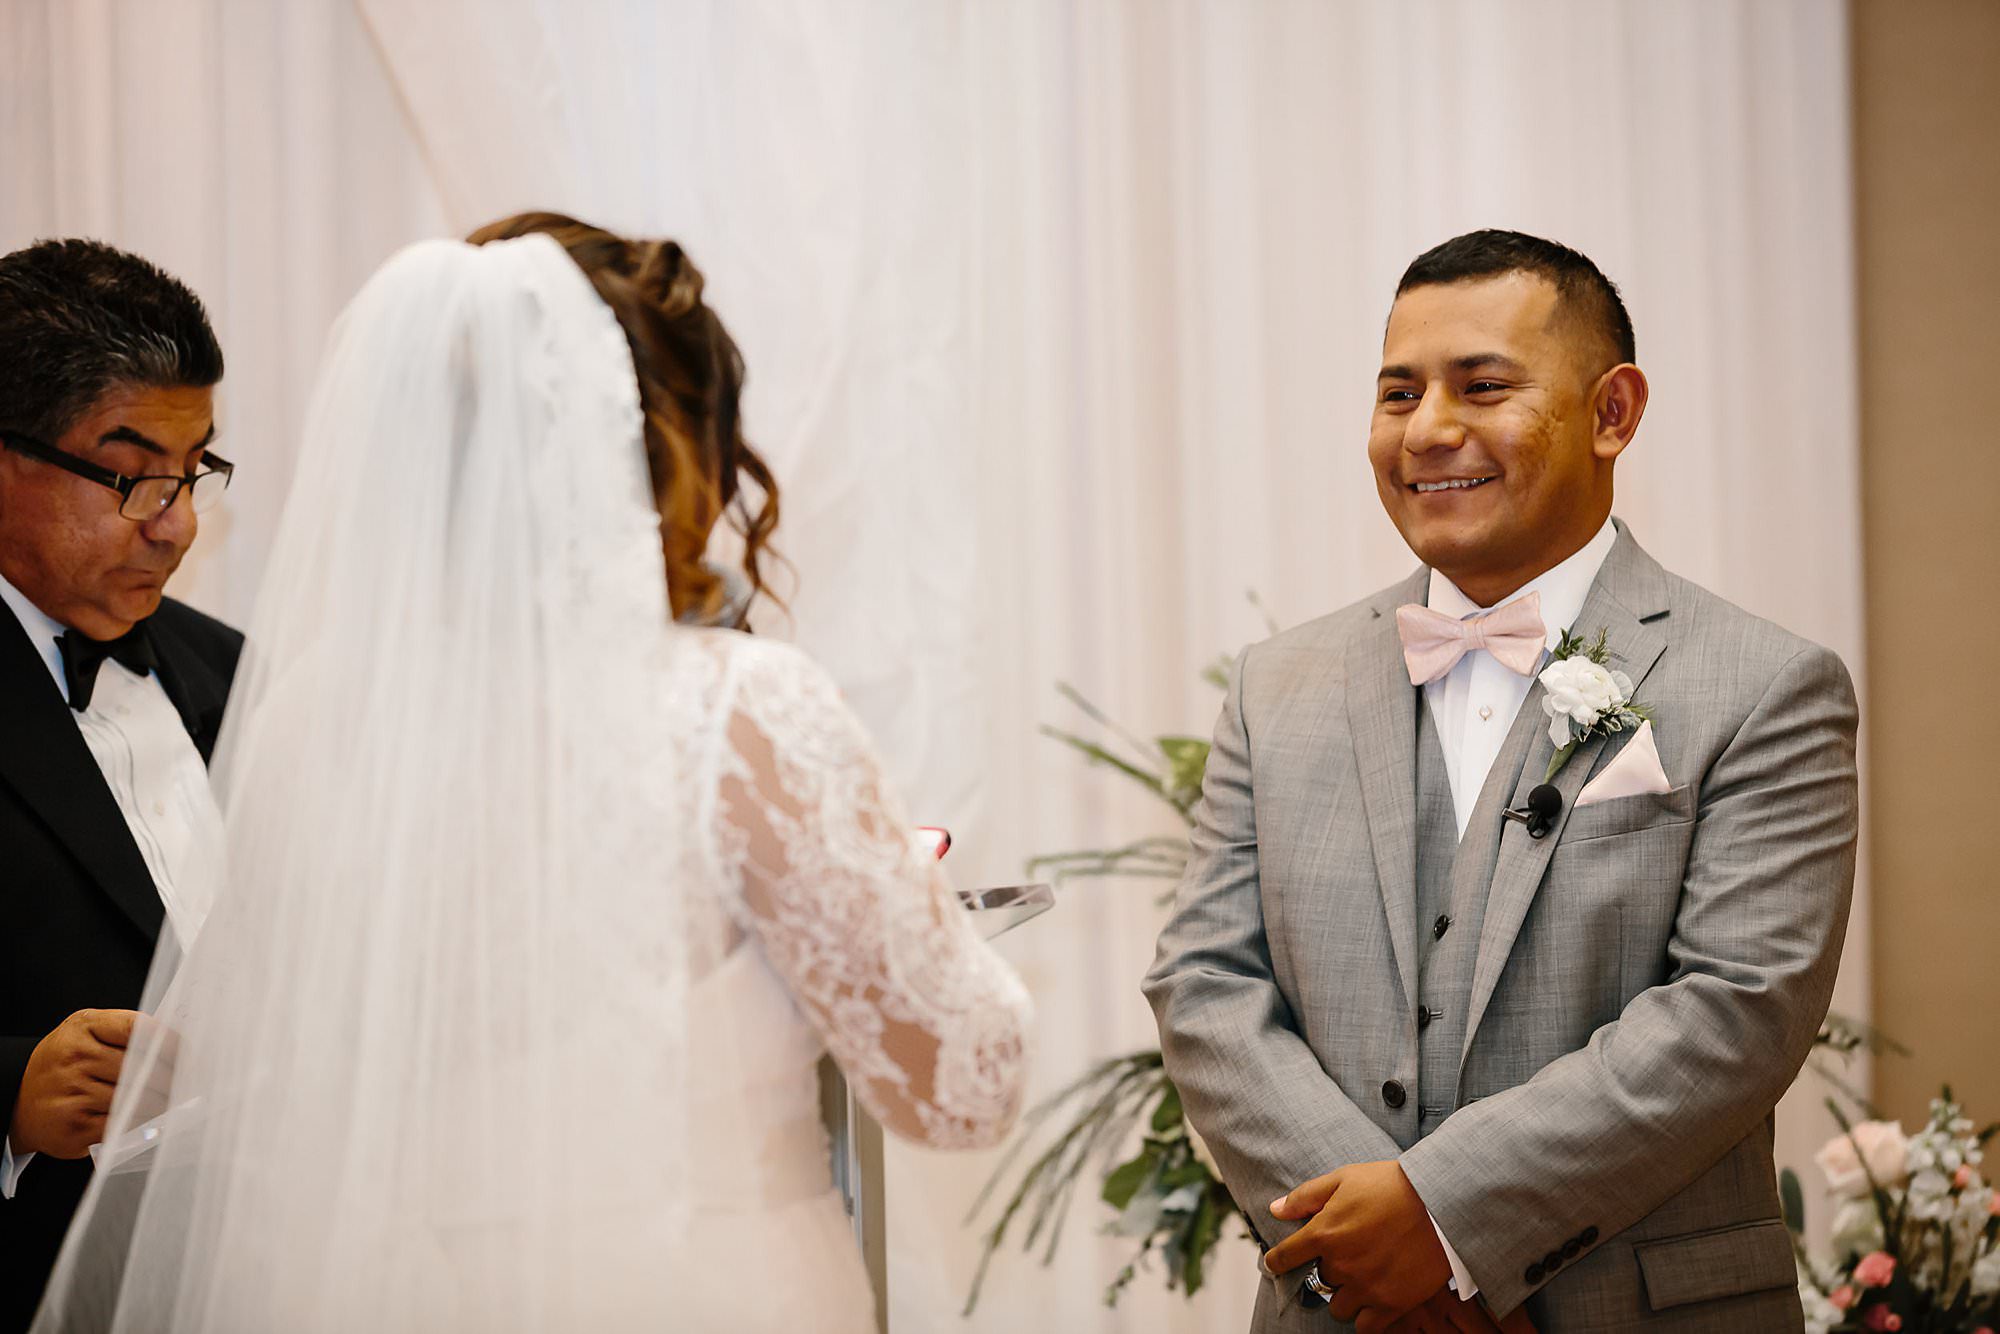 Groom smiling at bride reciting vows